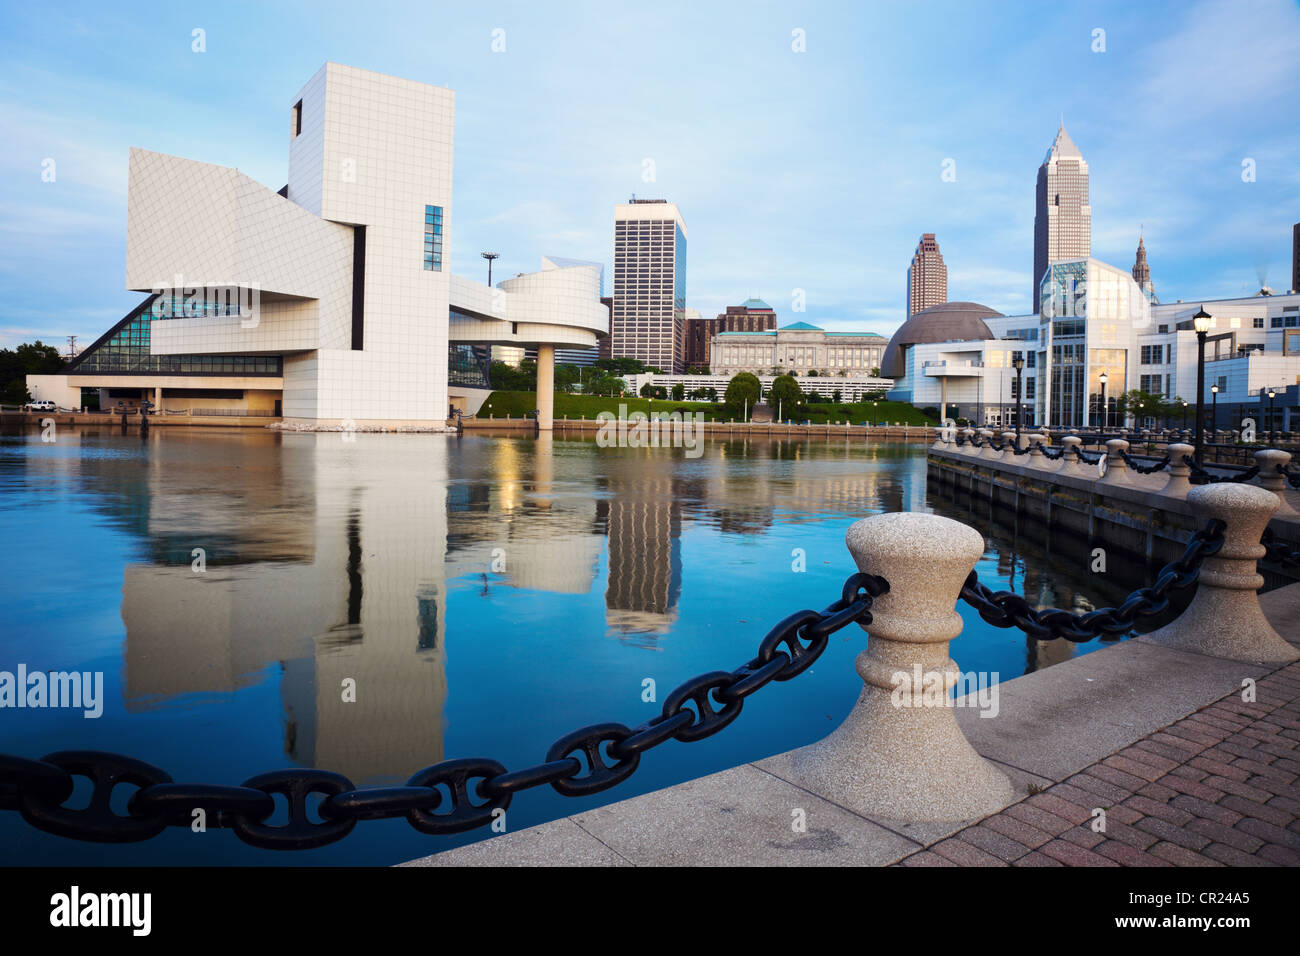 Cleveland seen morning time Stock Photo